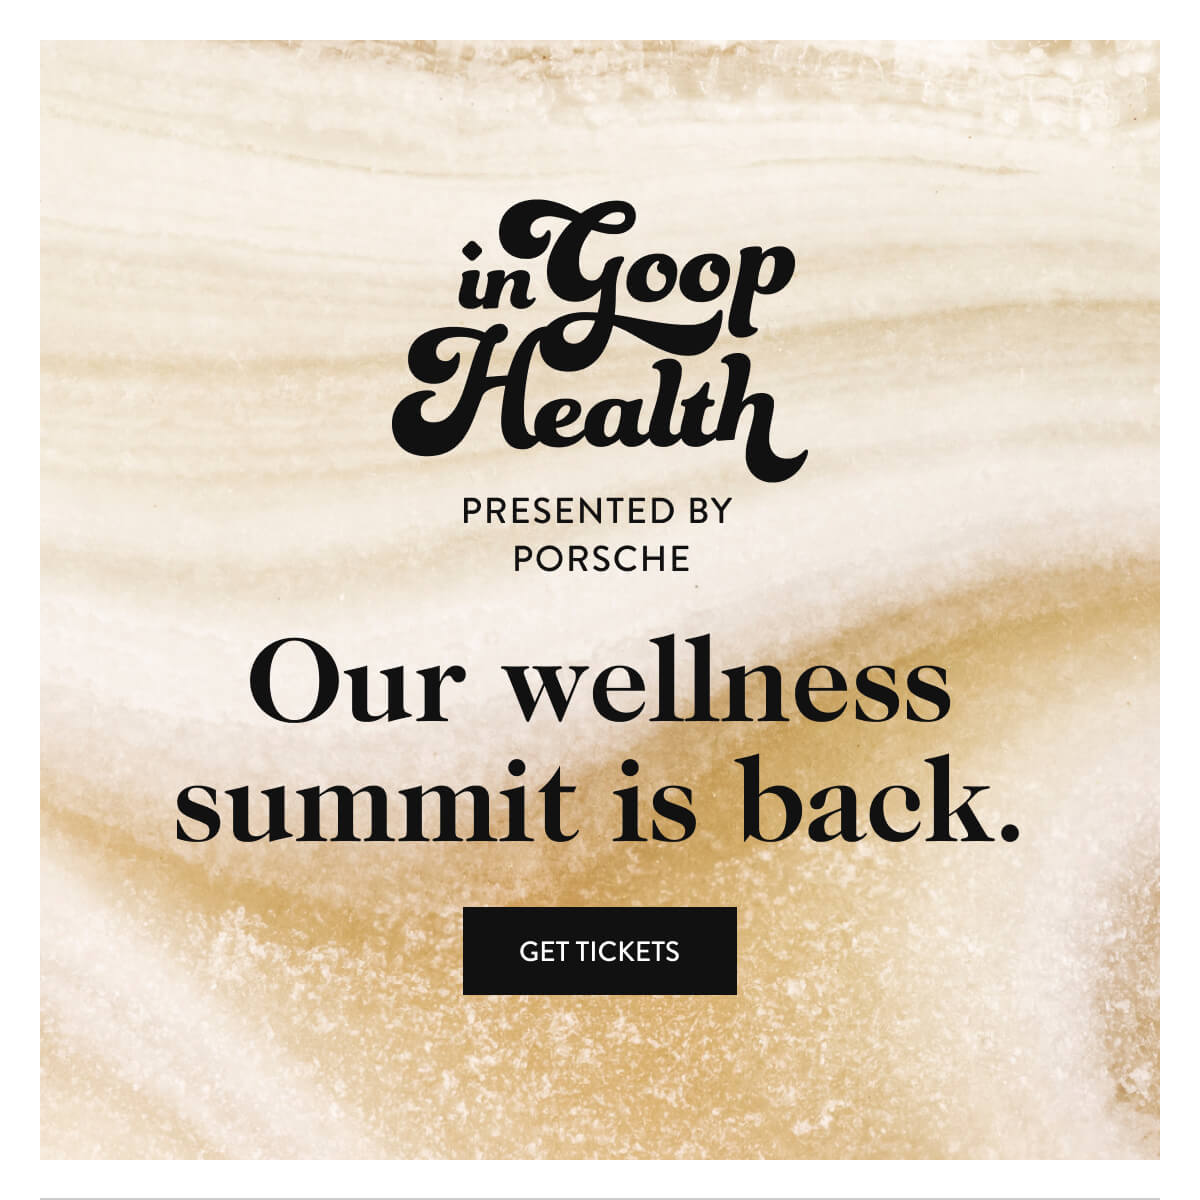 inGoopHealth presented by porsche Our wellness summit is back - Get tickets